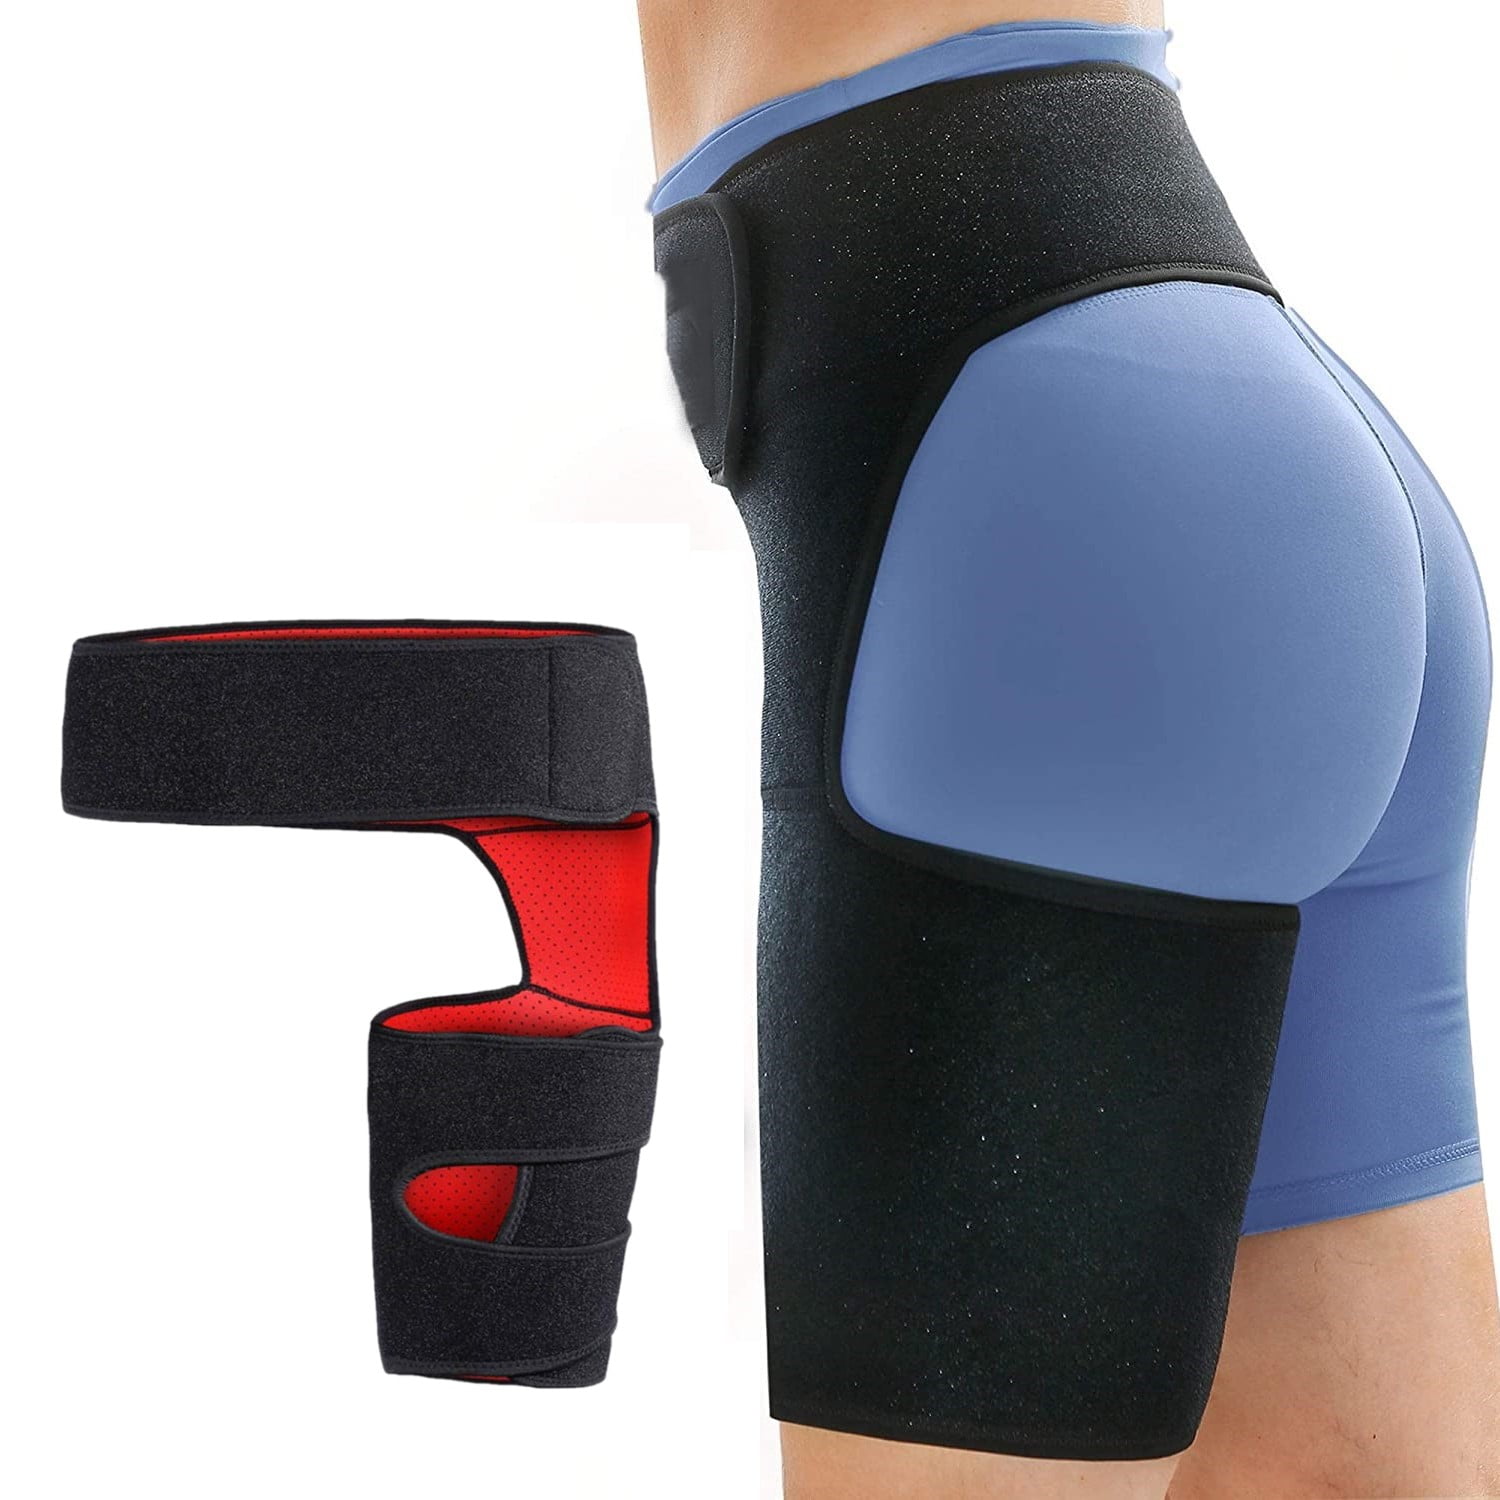 Aptoco Hip Brace for Hip Pain Groin Support Brace for Women Men Sciatica  Pain Relief, Compression Brace for Pulled Muscles, Gifts for Her